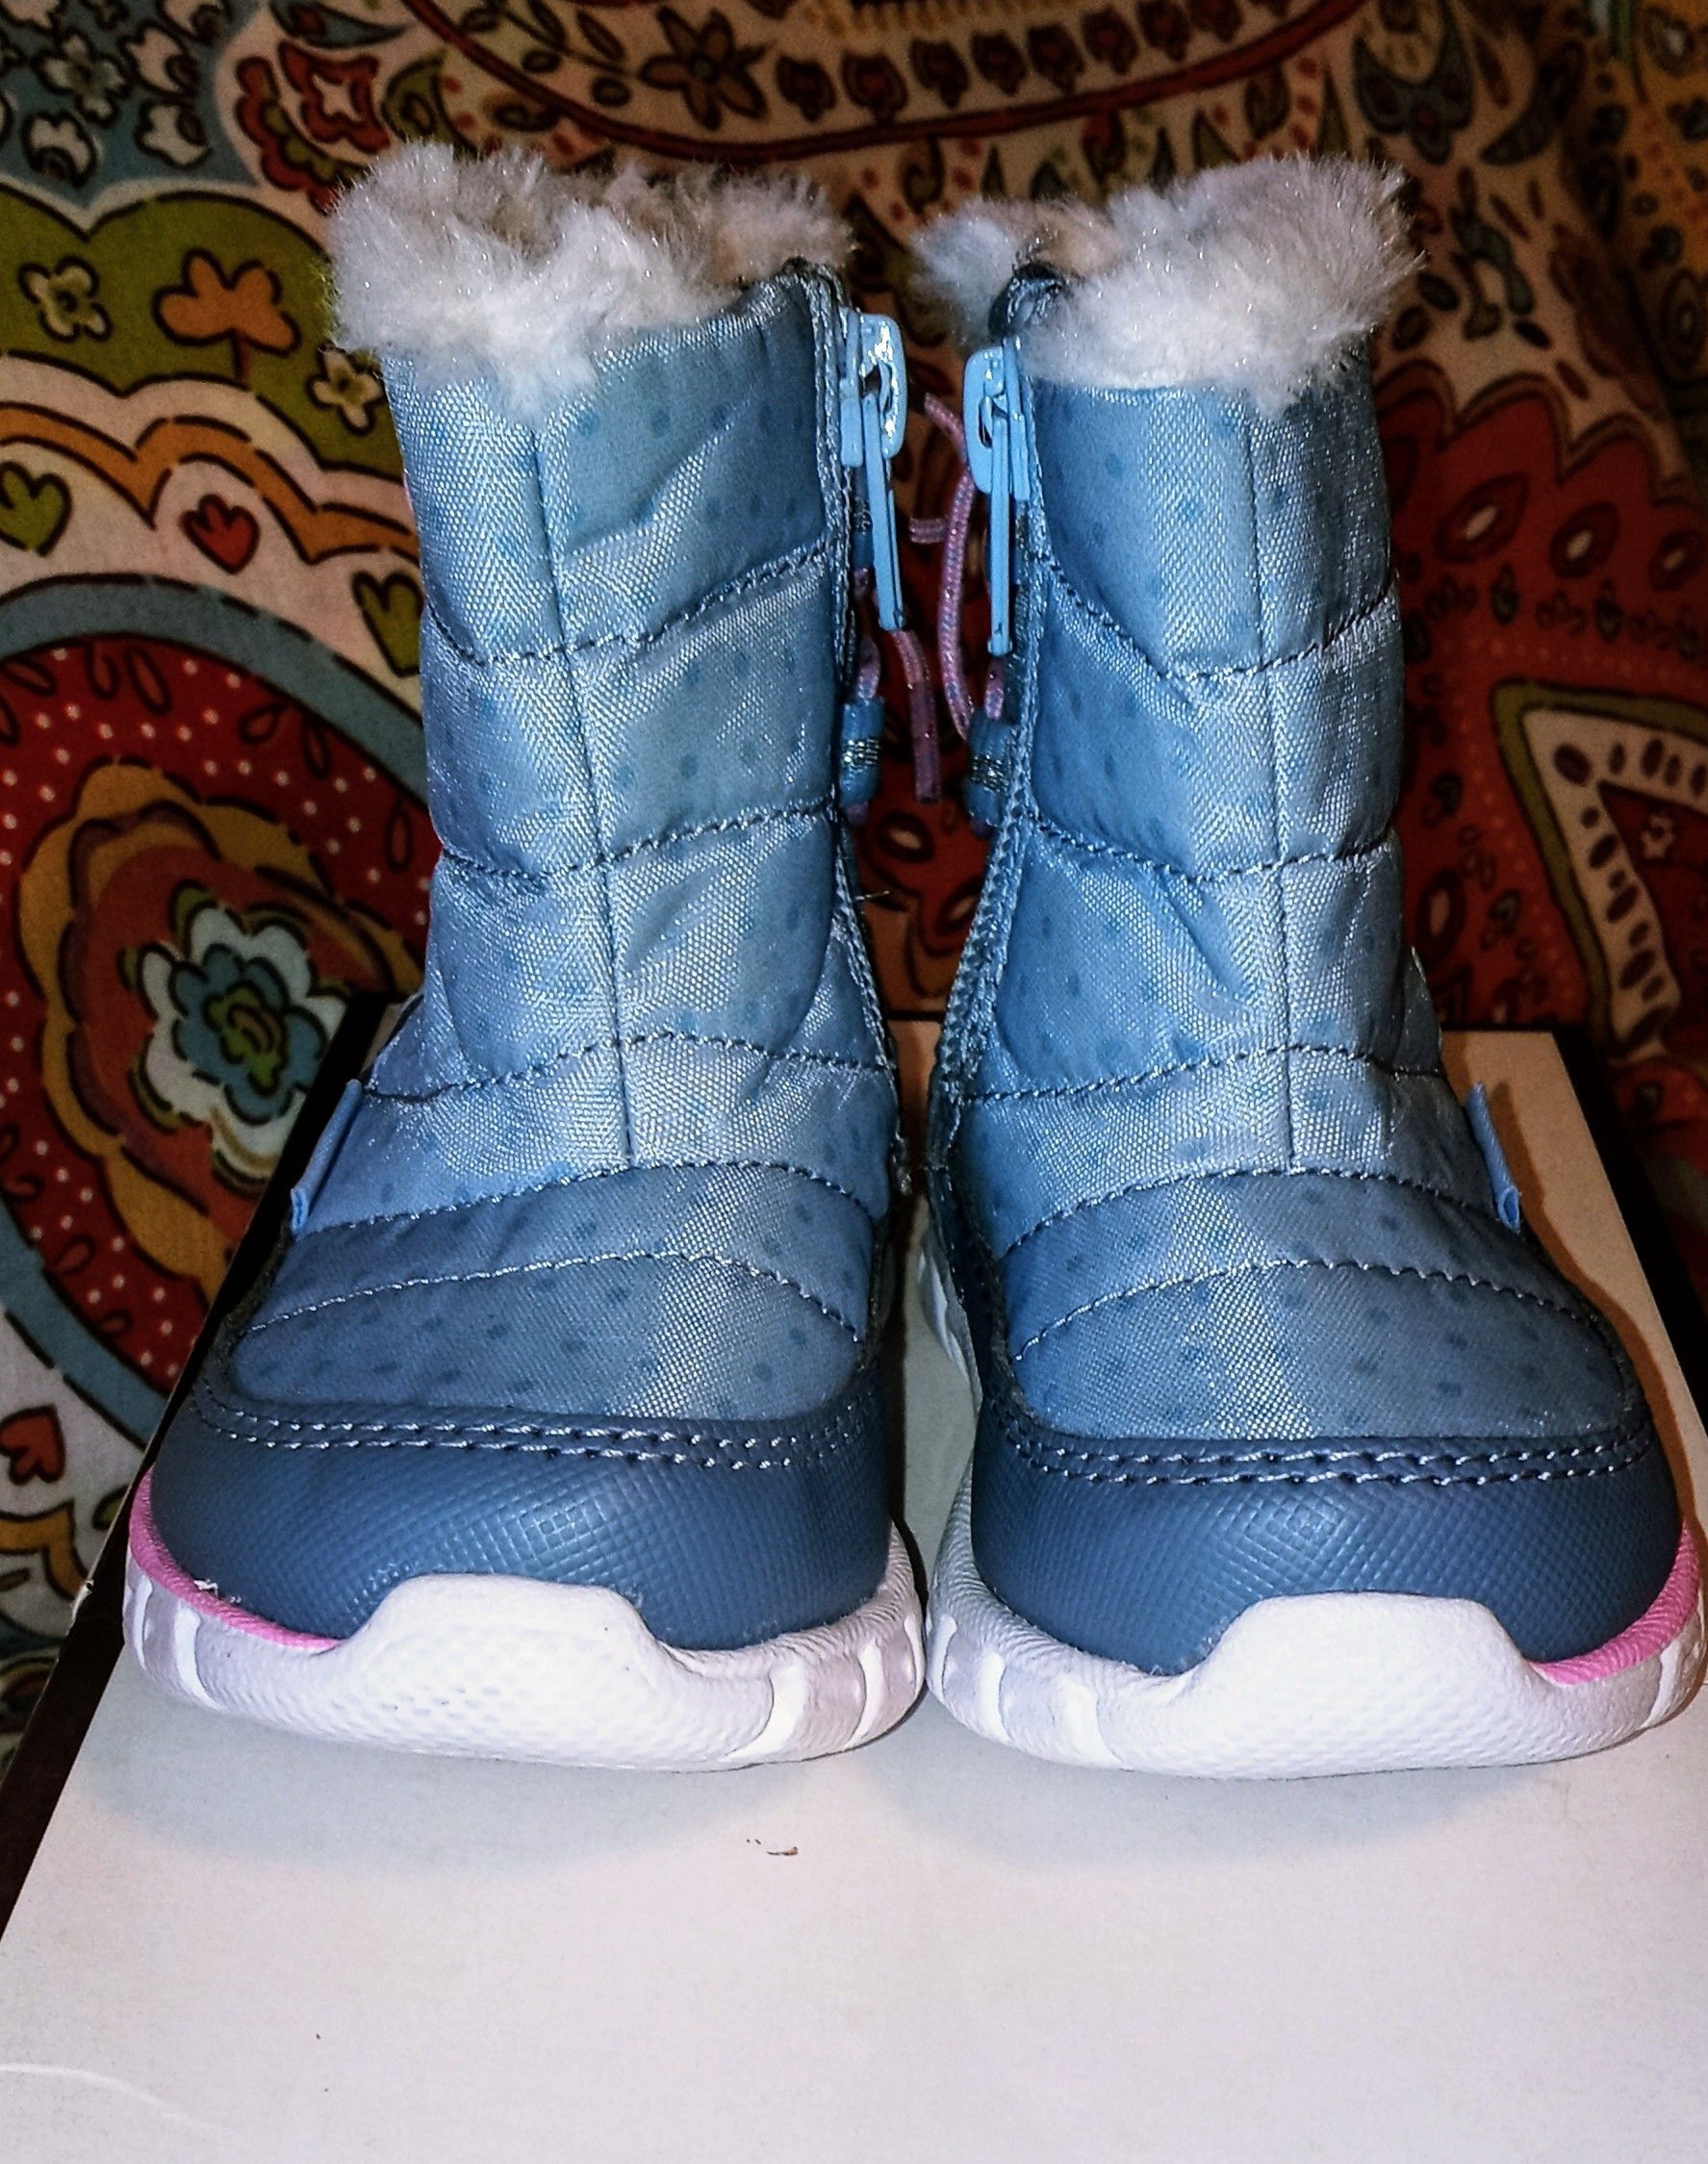 Toddler boots 2 pair